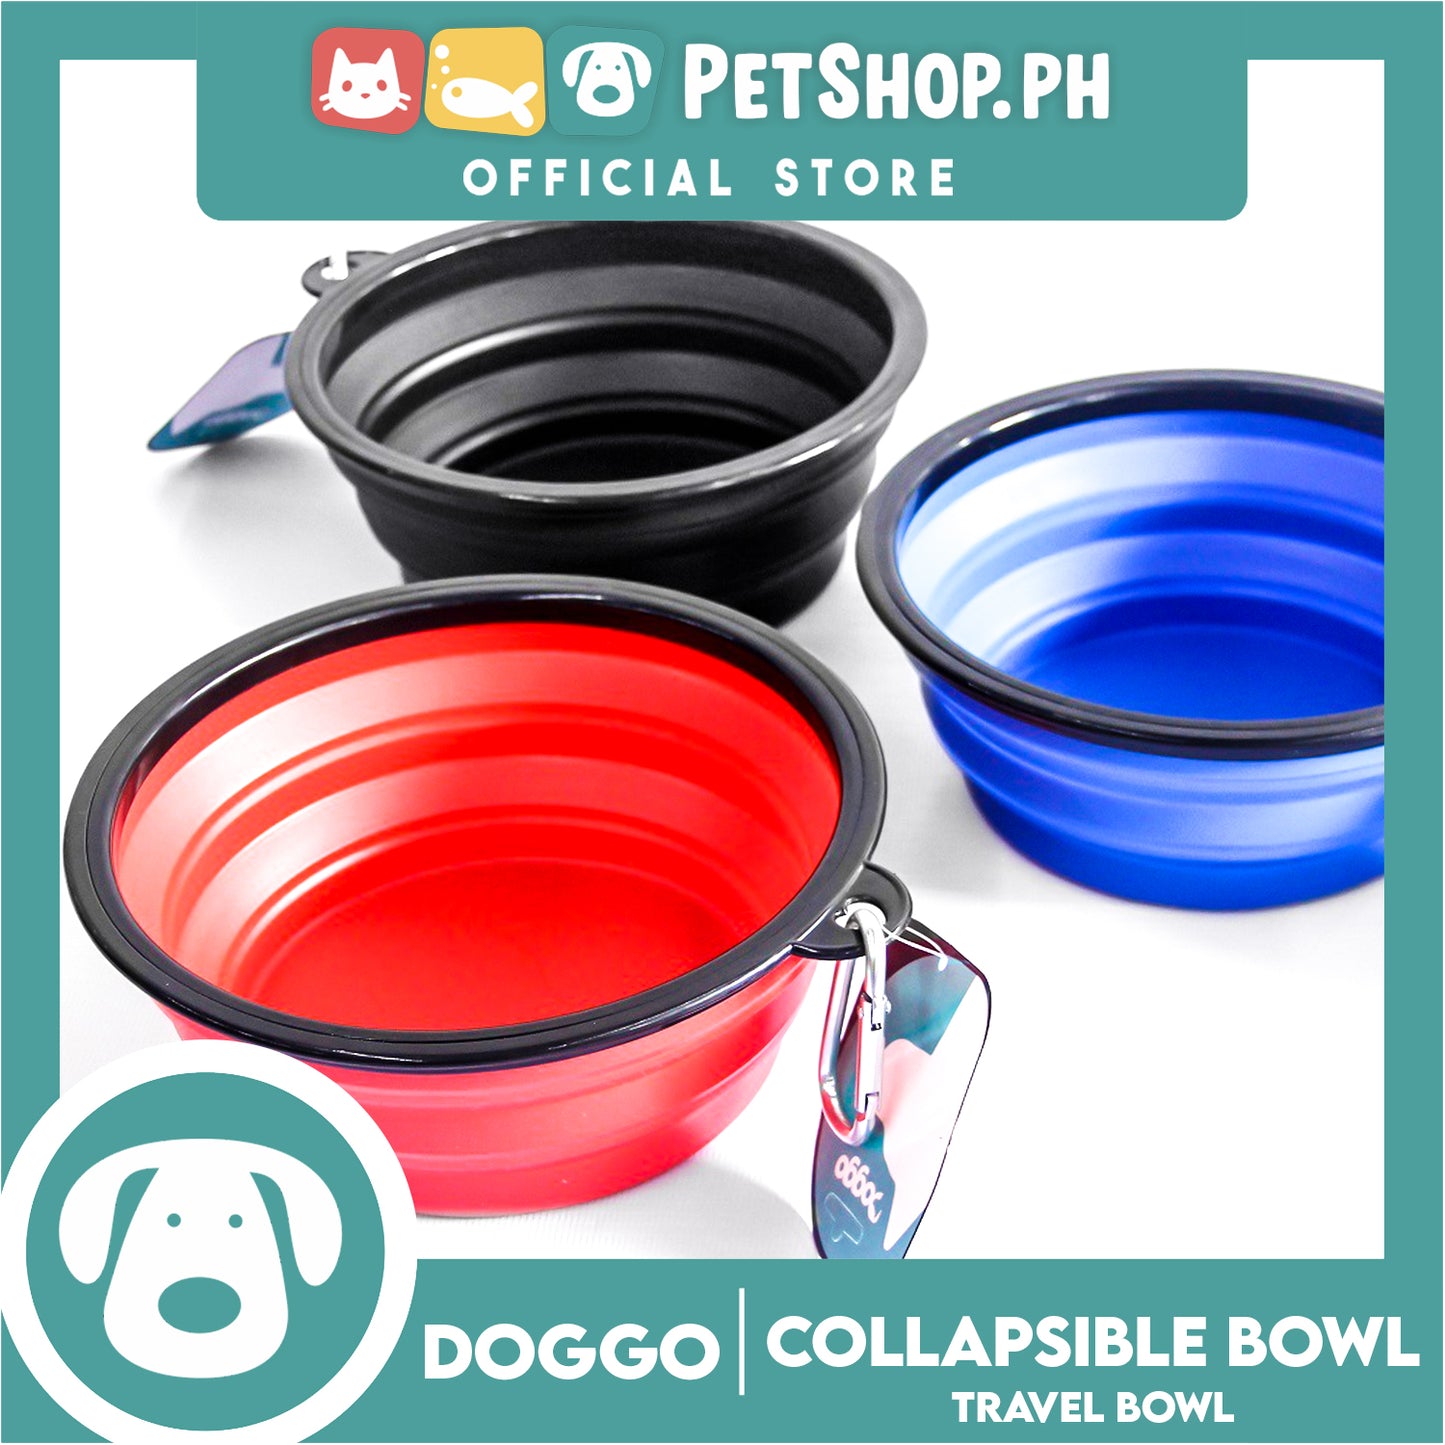 Doggo Collapsible Travel Bowl Small Size (Red) Foldable Pet Feeding Bowl